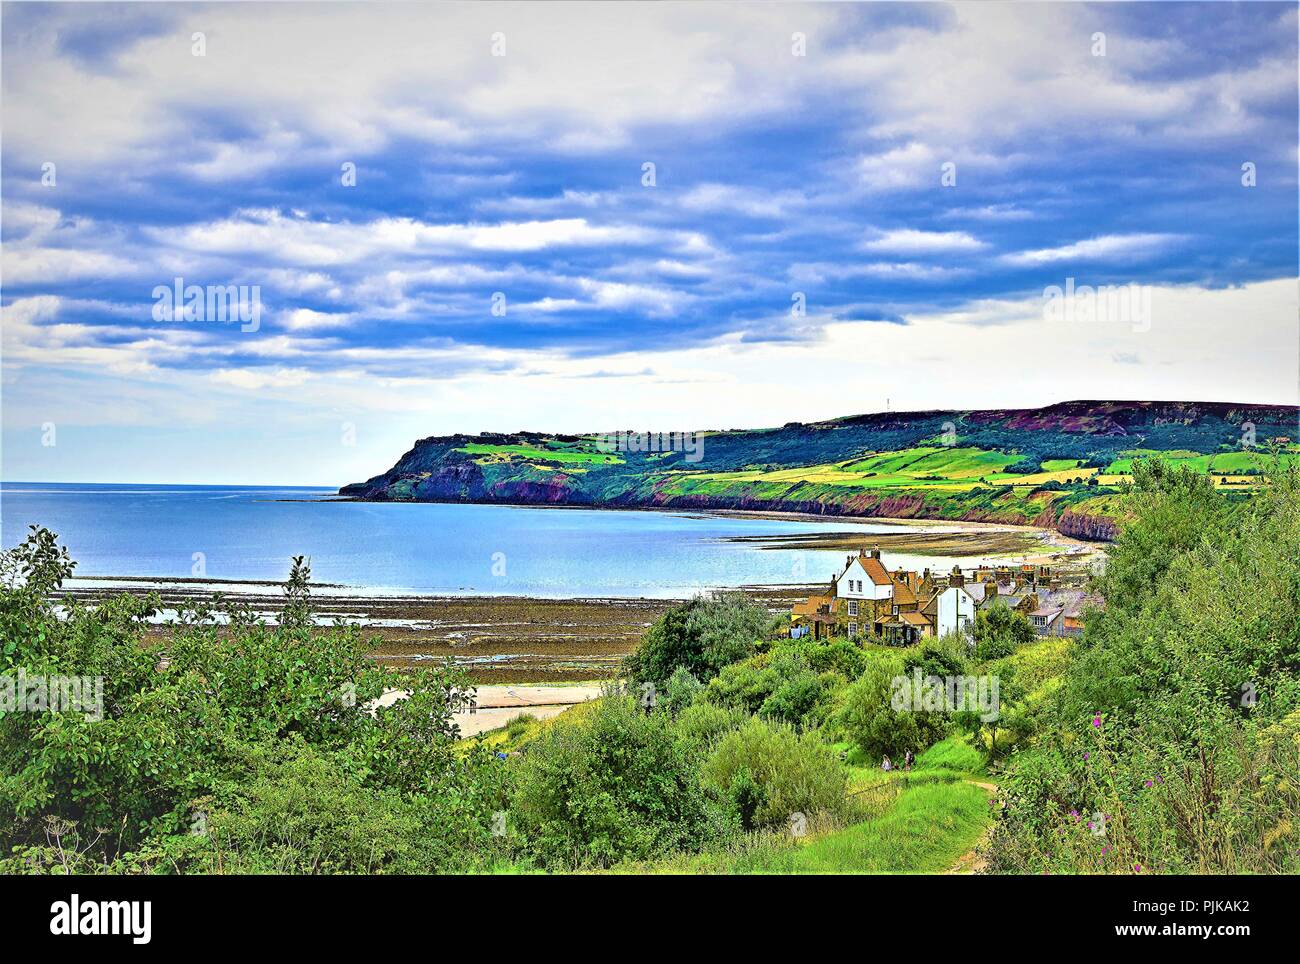 Summer time blues in Robin Hood's Bay, North Yorkshire, England. Stock Photo